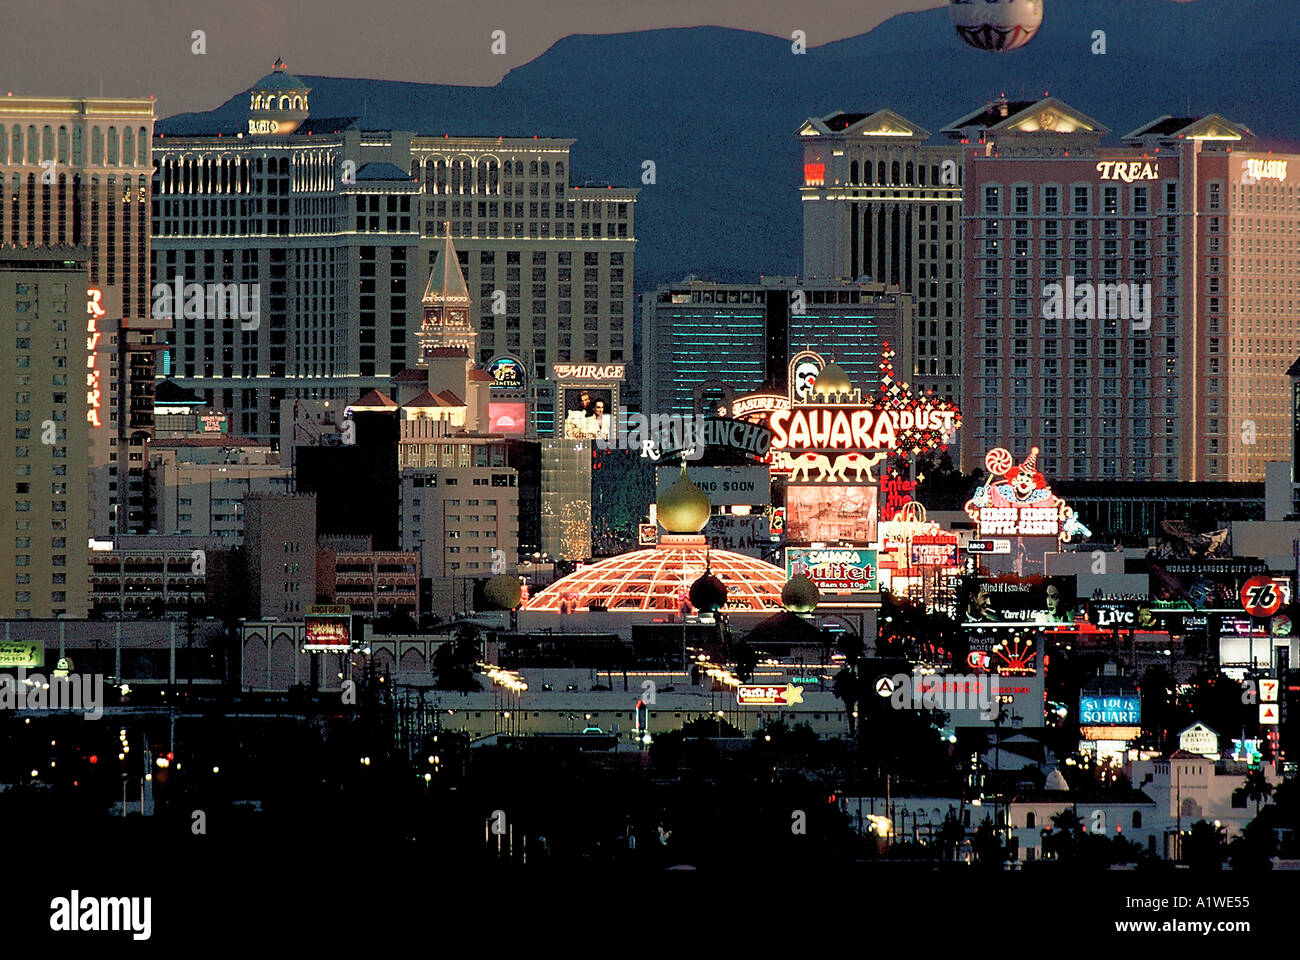 Bellagio Caesars Mirage Treasure Island and the Venetian Hotels and Casinos  all visible in this compressed view of Las Vegas Stock Photo - Alamy